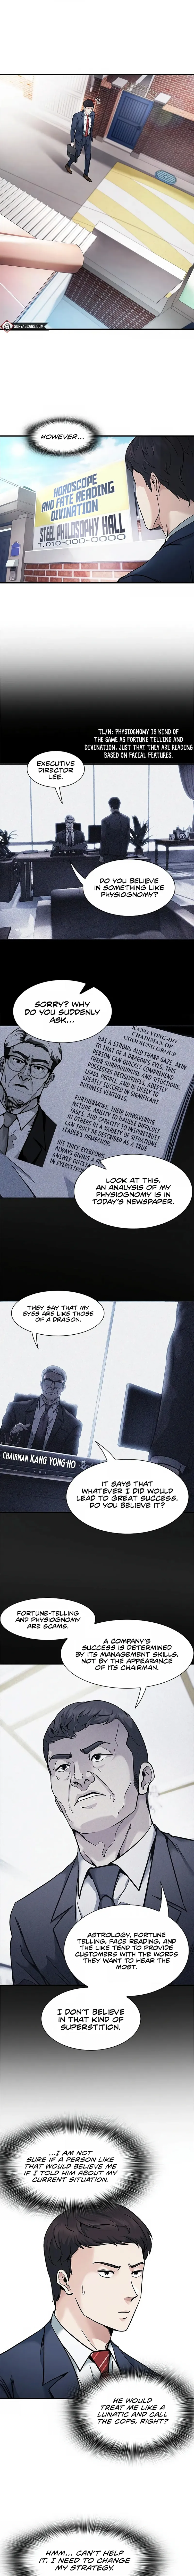 Chairman Kang: The Newcomer Chapter 6 page 3